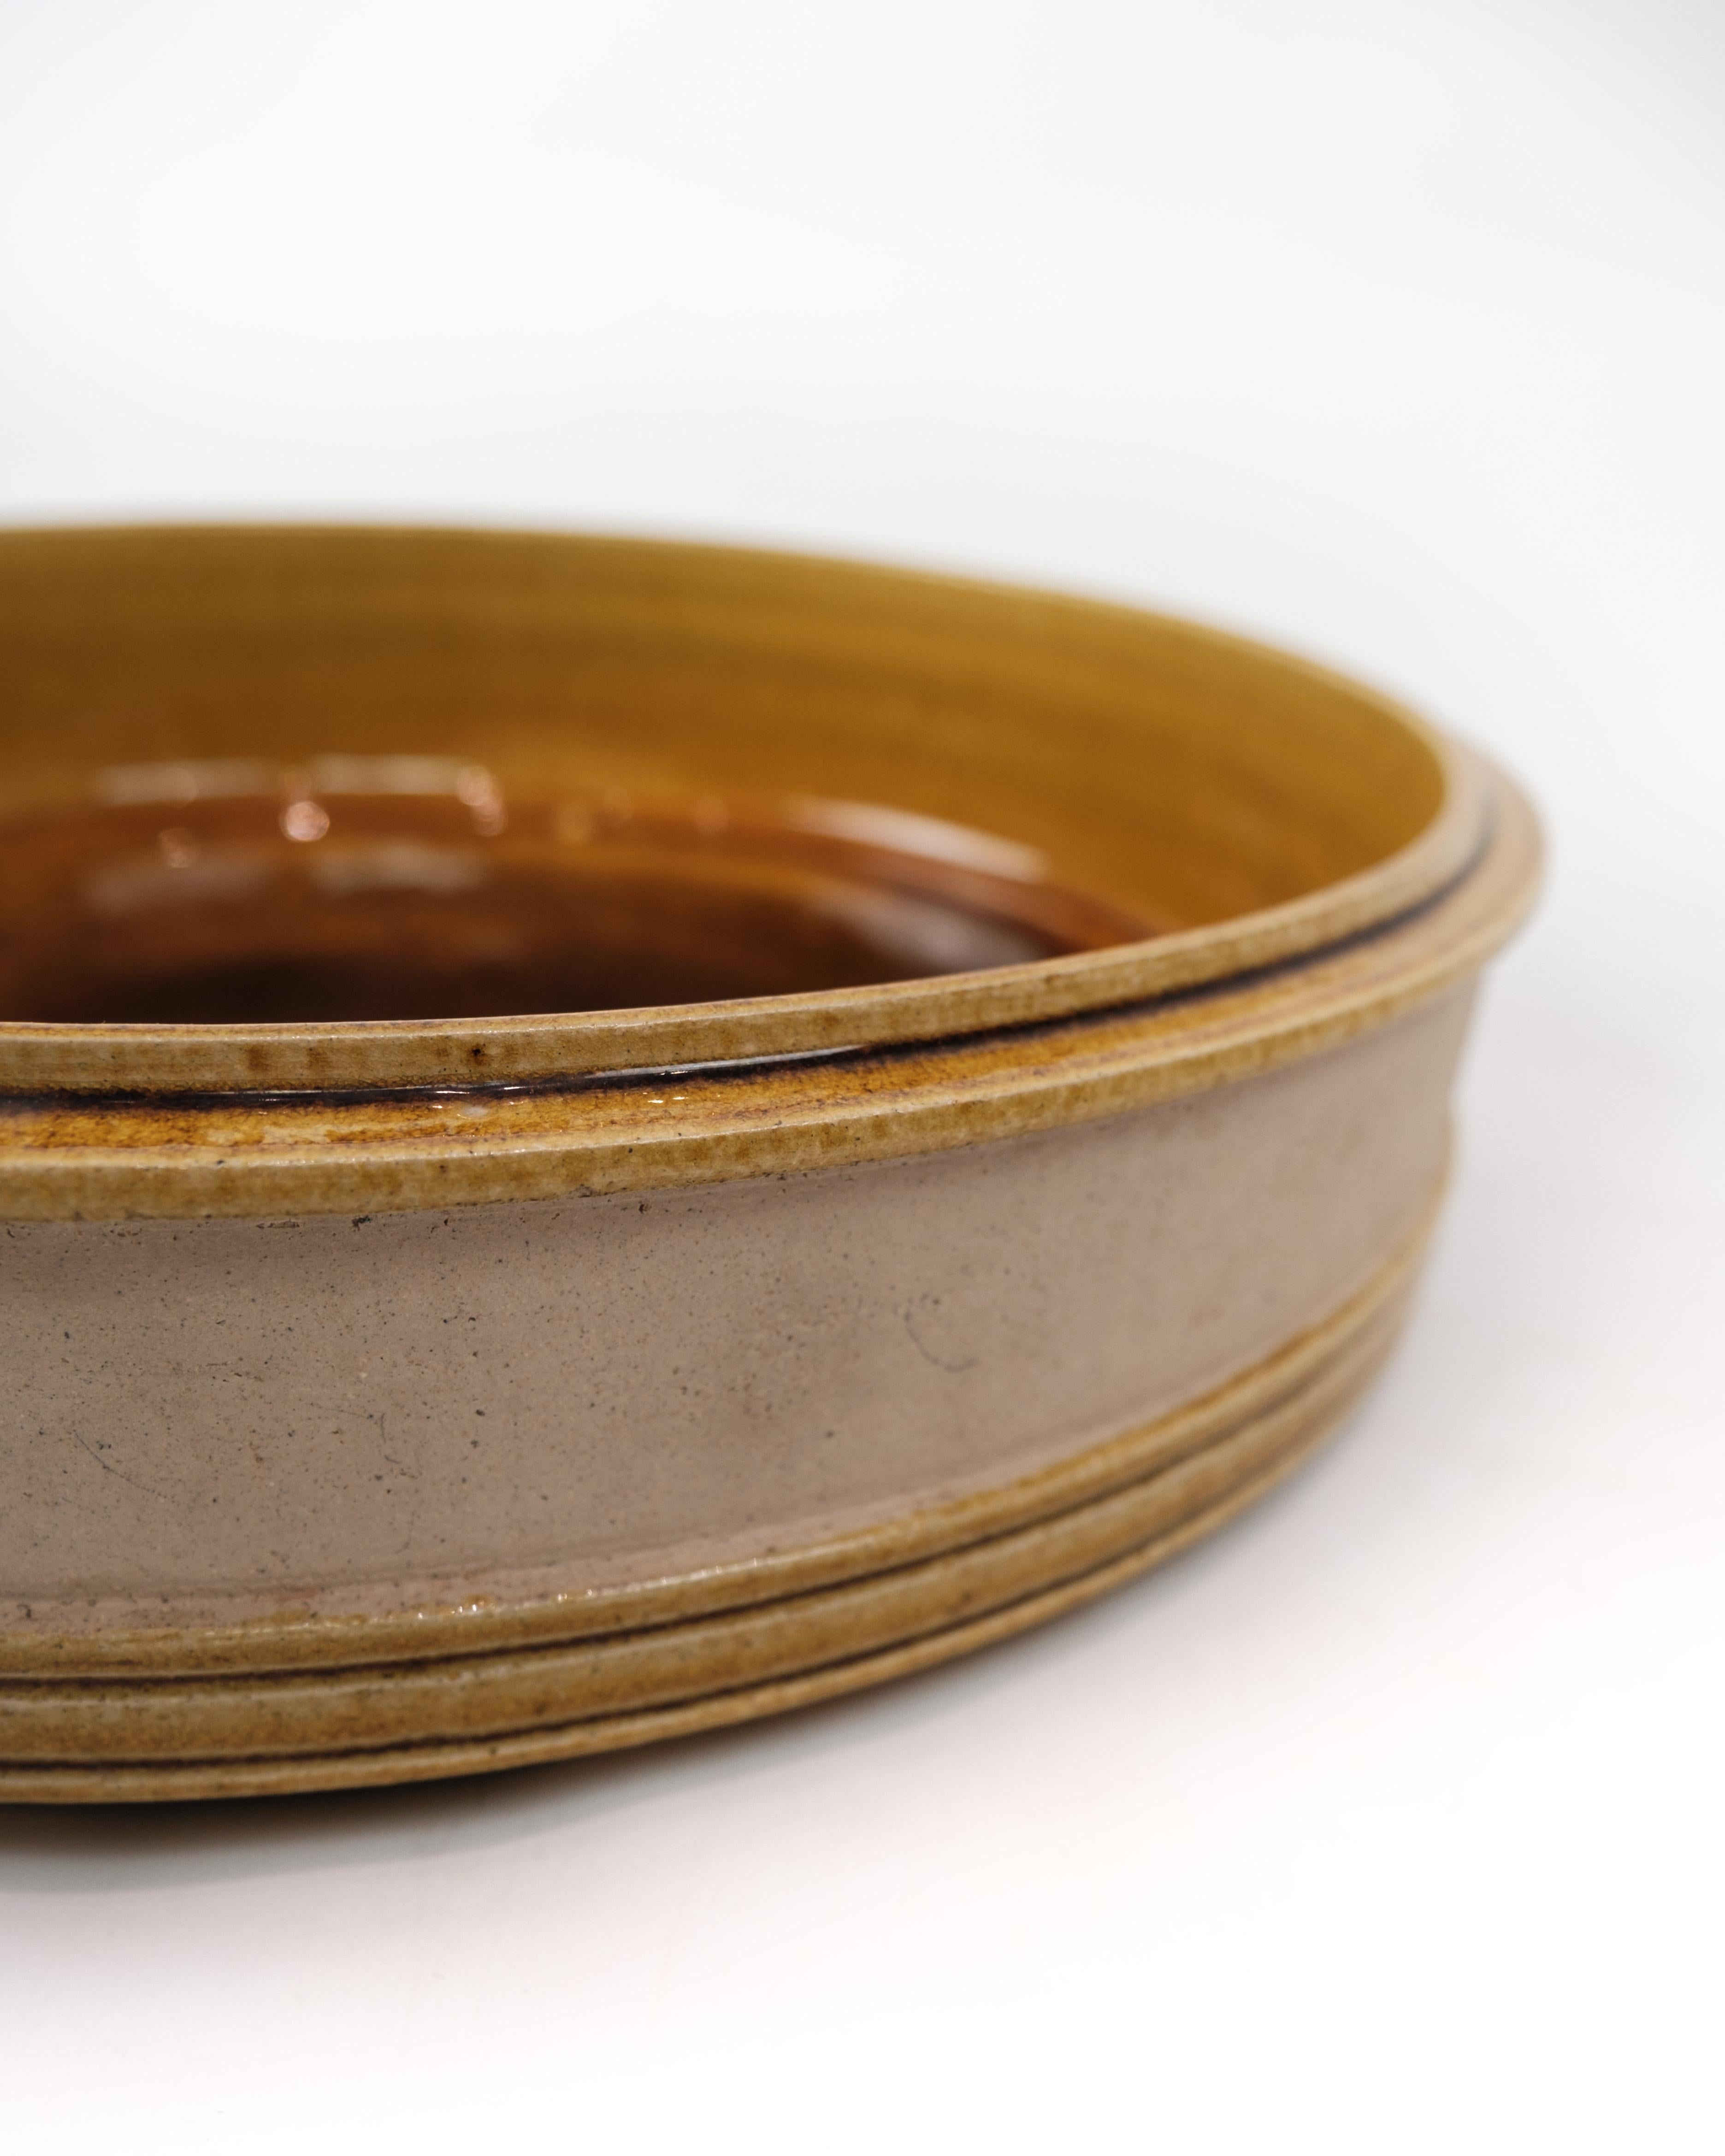 Danish Ceramic Bowl In Dark Brown Shades By Herman Kähler From 1960s For Sale